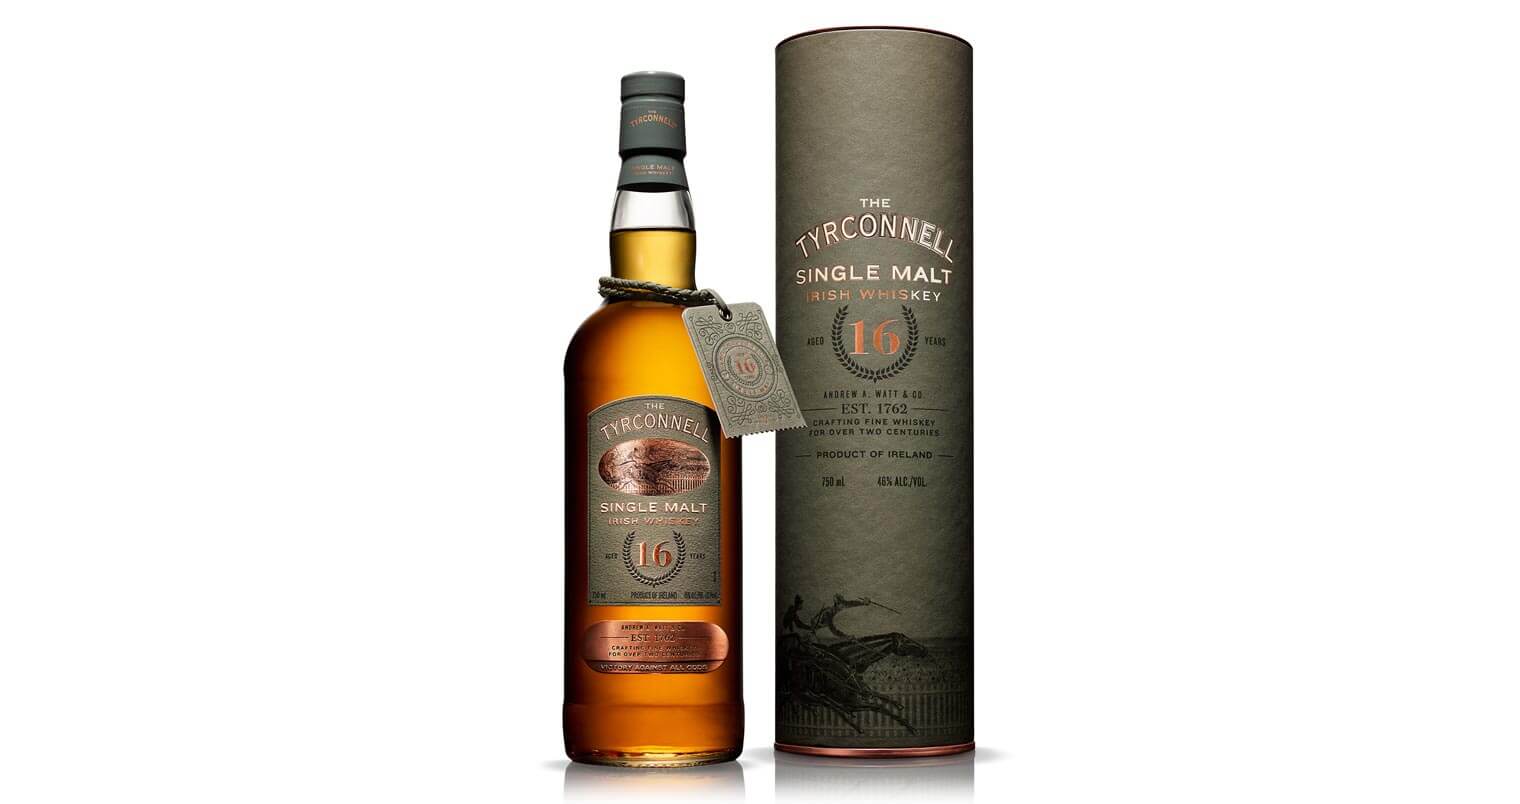 The Tyrconnell 16 Year Old Limited Edition Launches, featured image